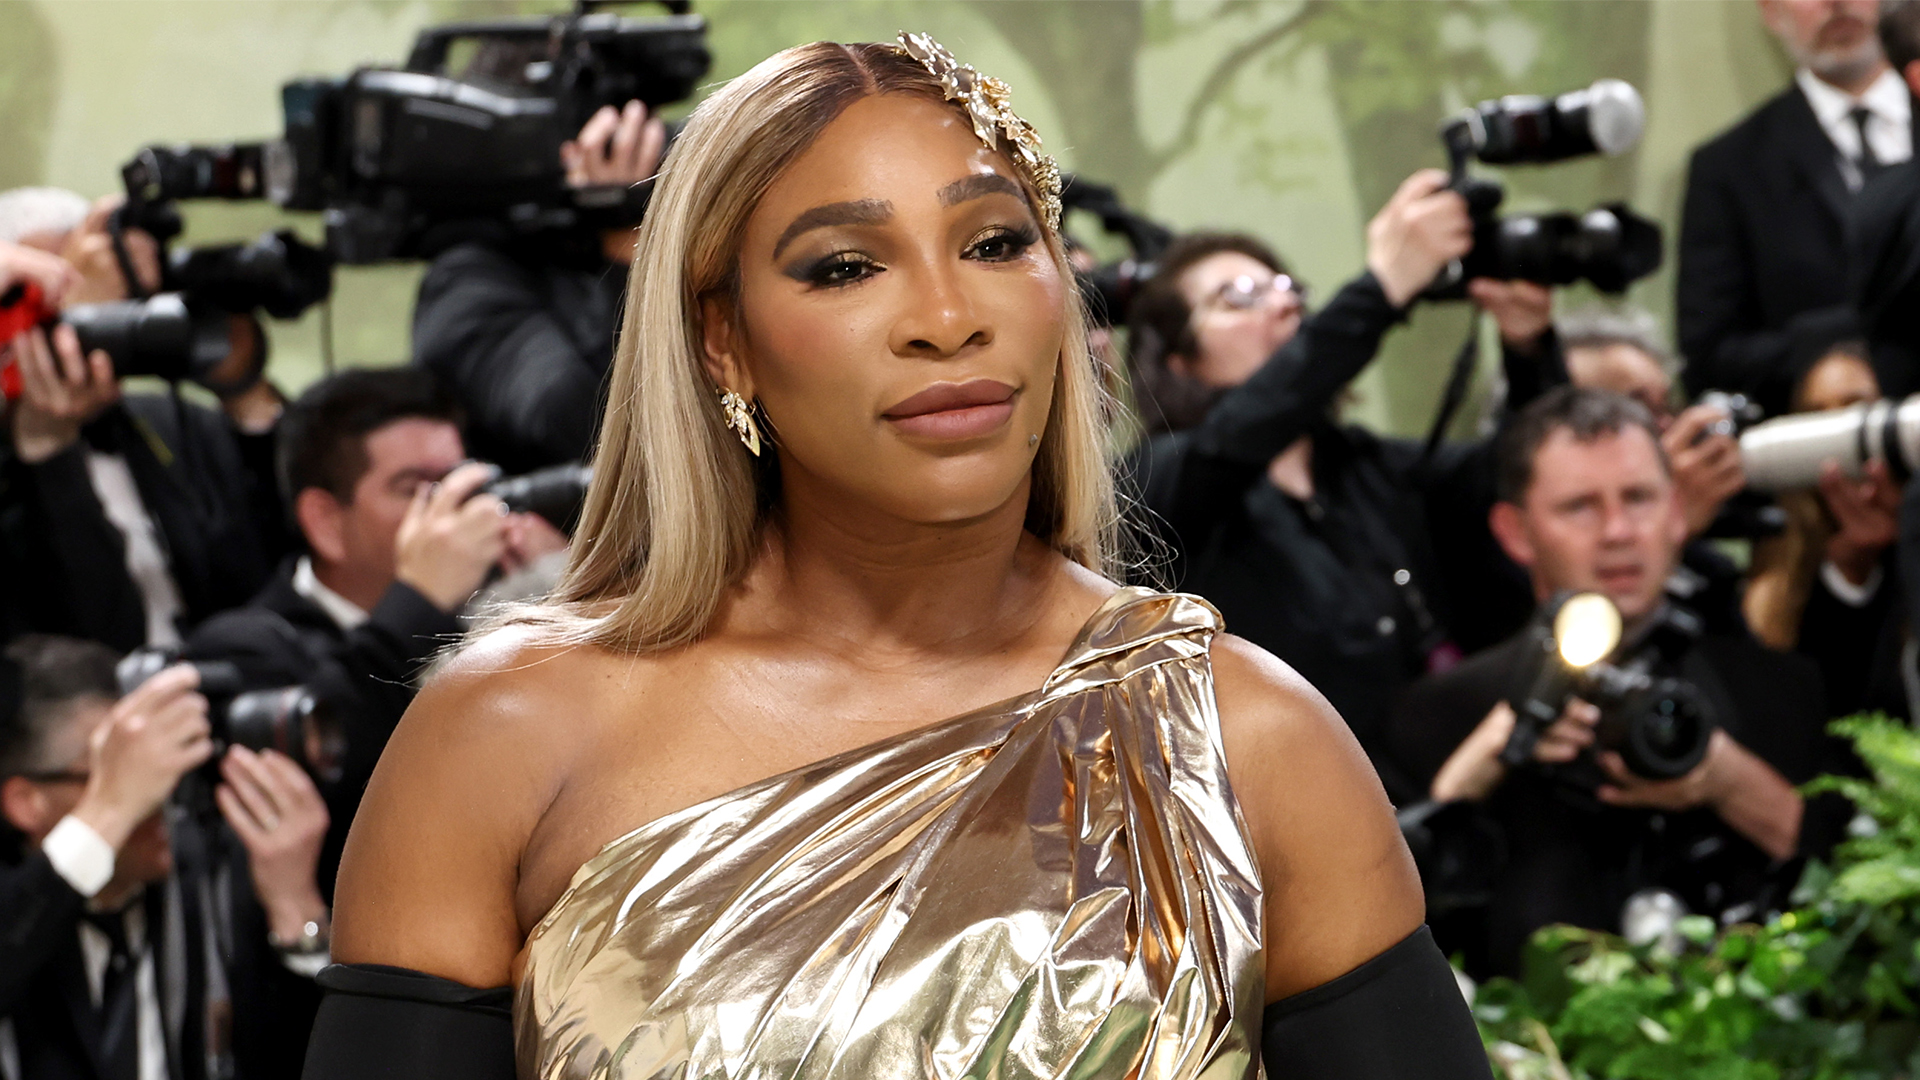 At Age 16, Serena Williams Learned To Manage 'Huge Checks' From A Puma Deal On Her Own, ‘Empowered’ By Her Father